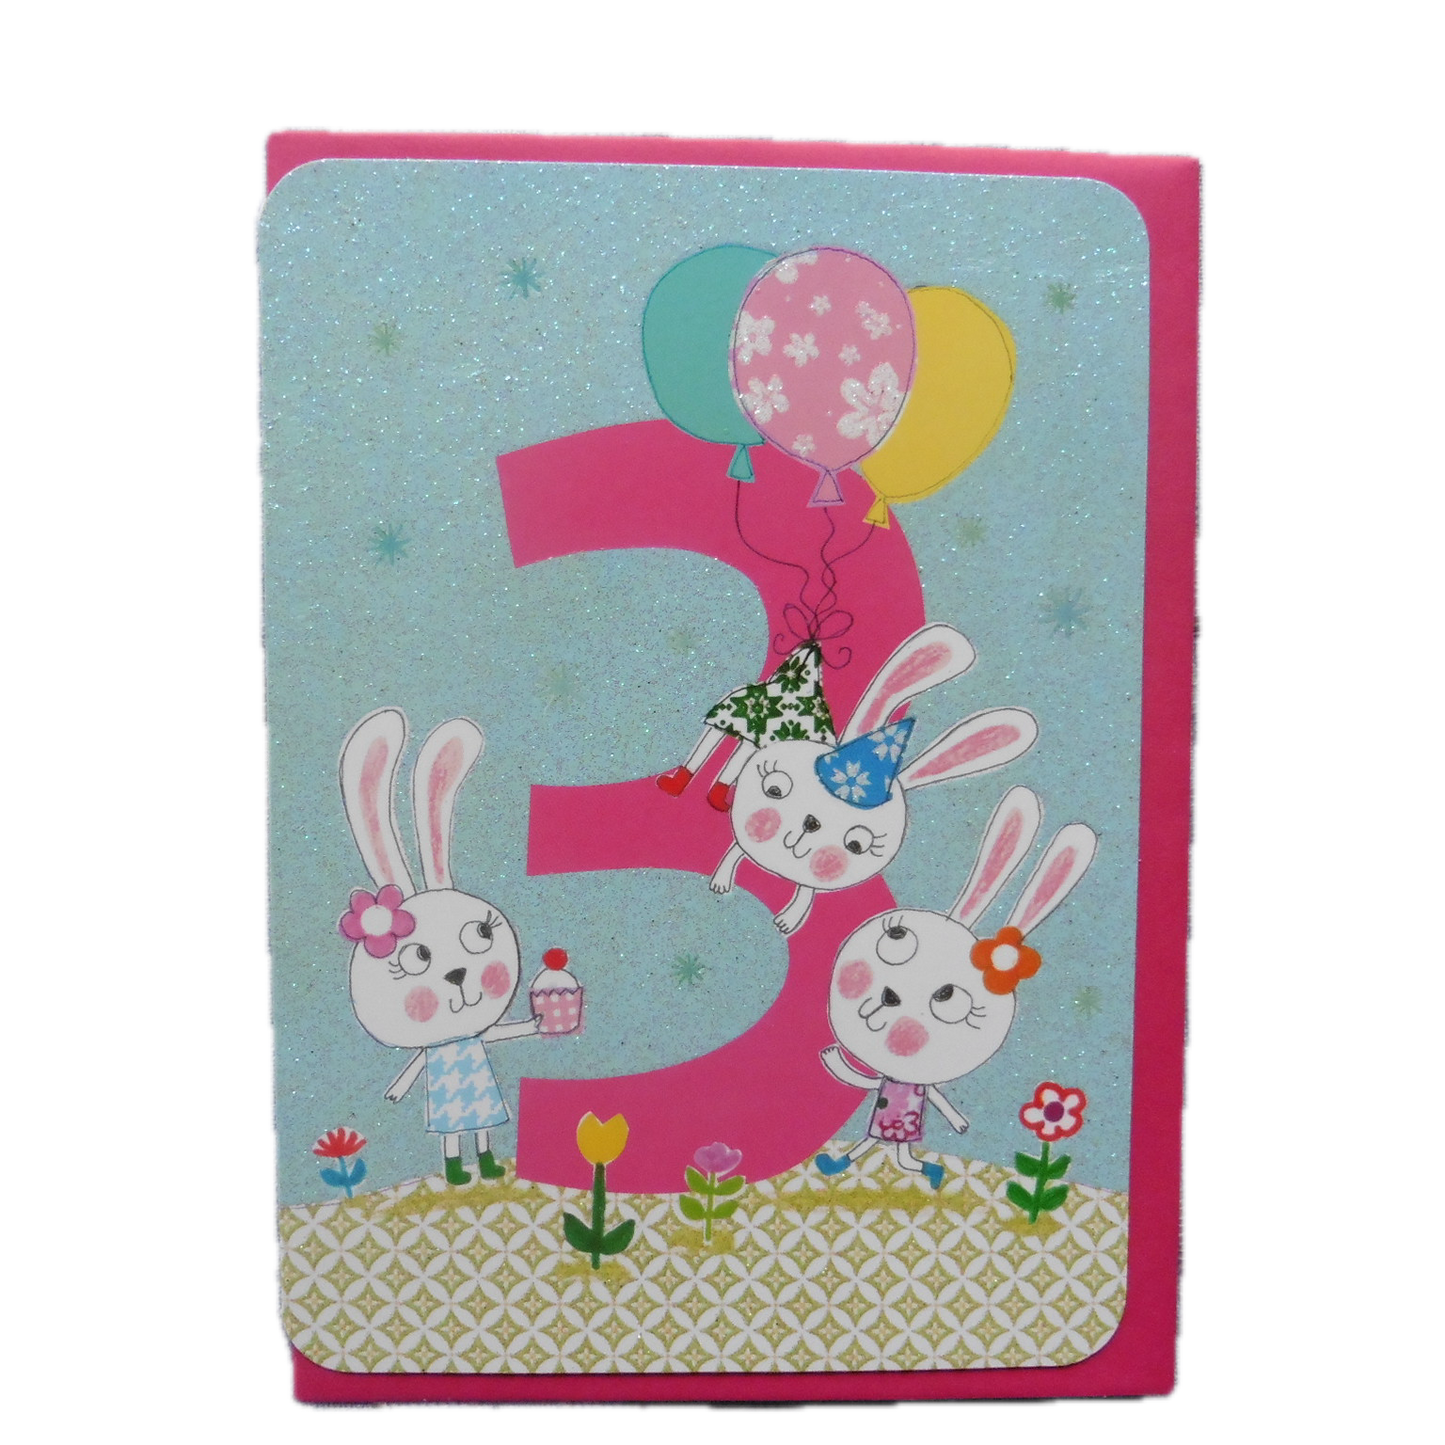 Age 3 card with bunnies